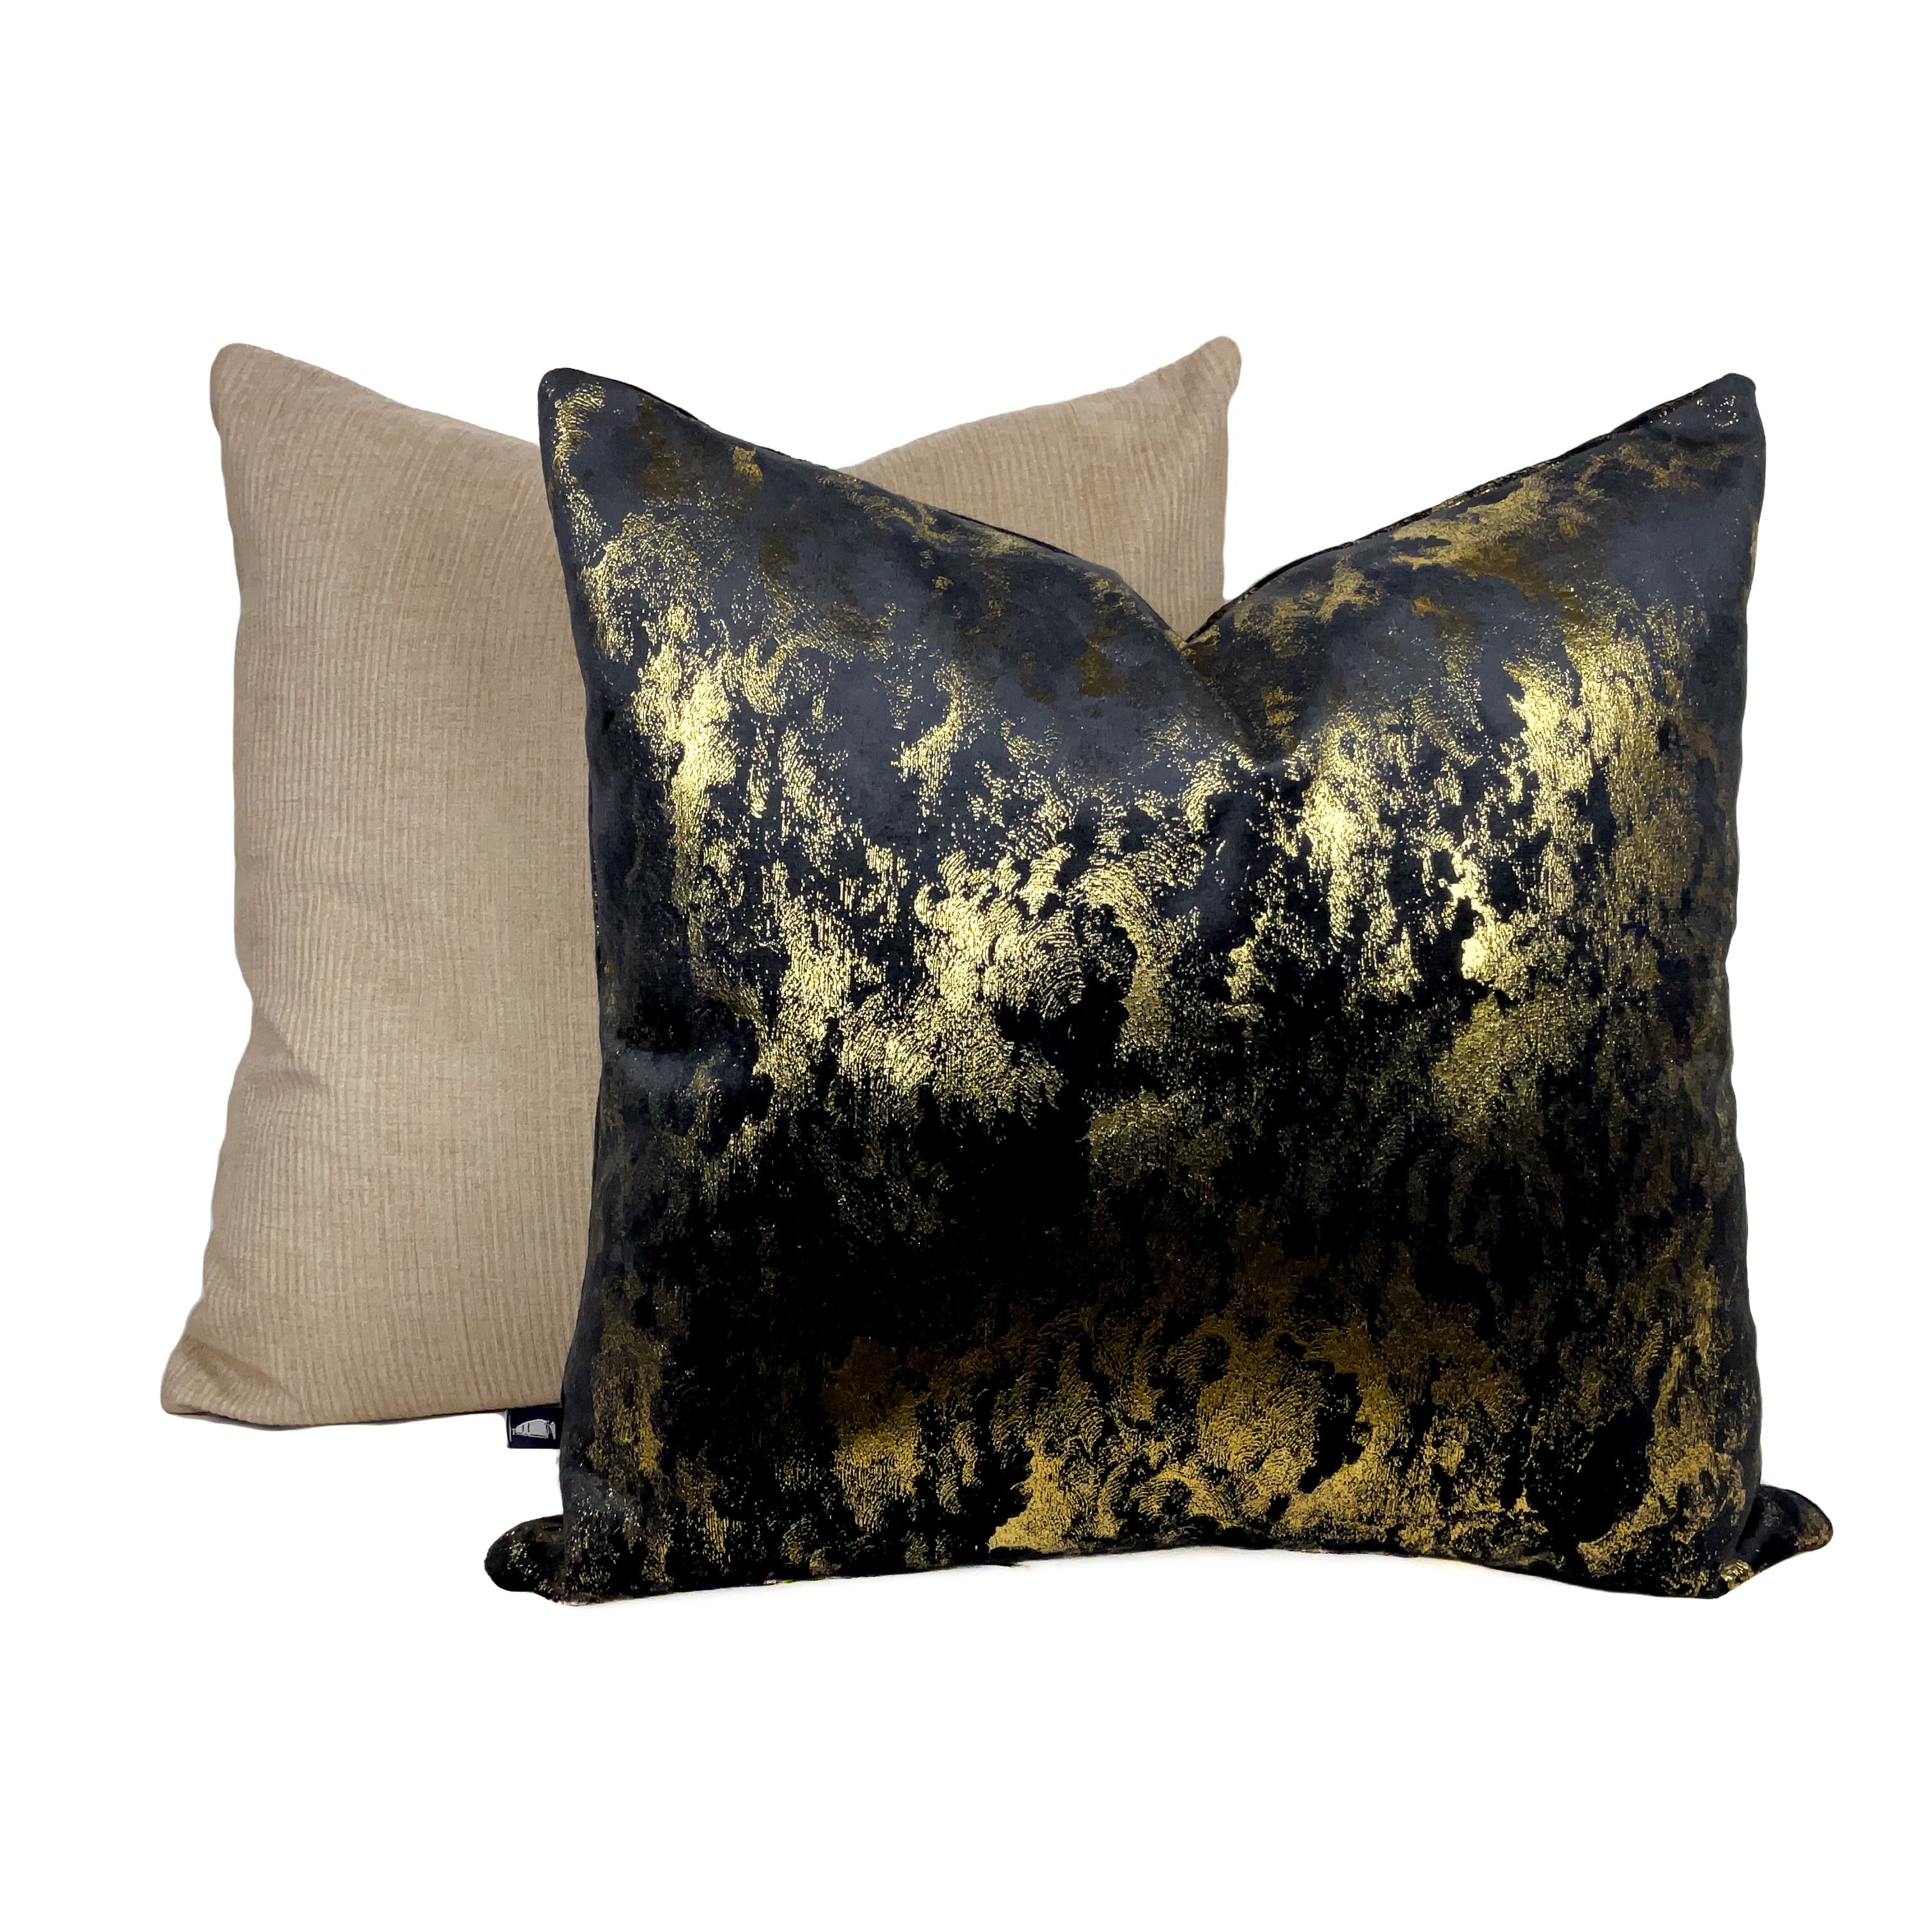 Grey black suede cushion with gold detailing placed against a white background. 